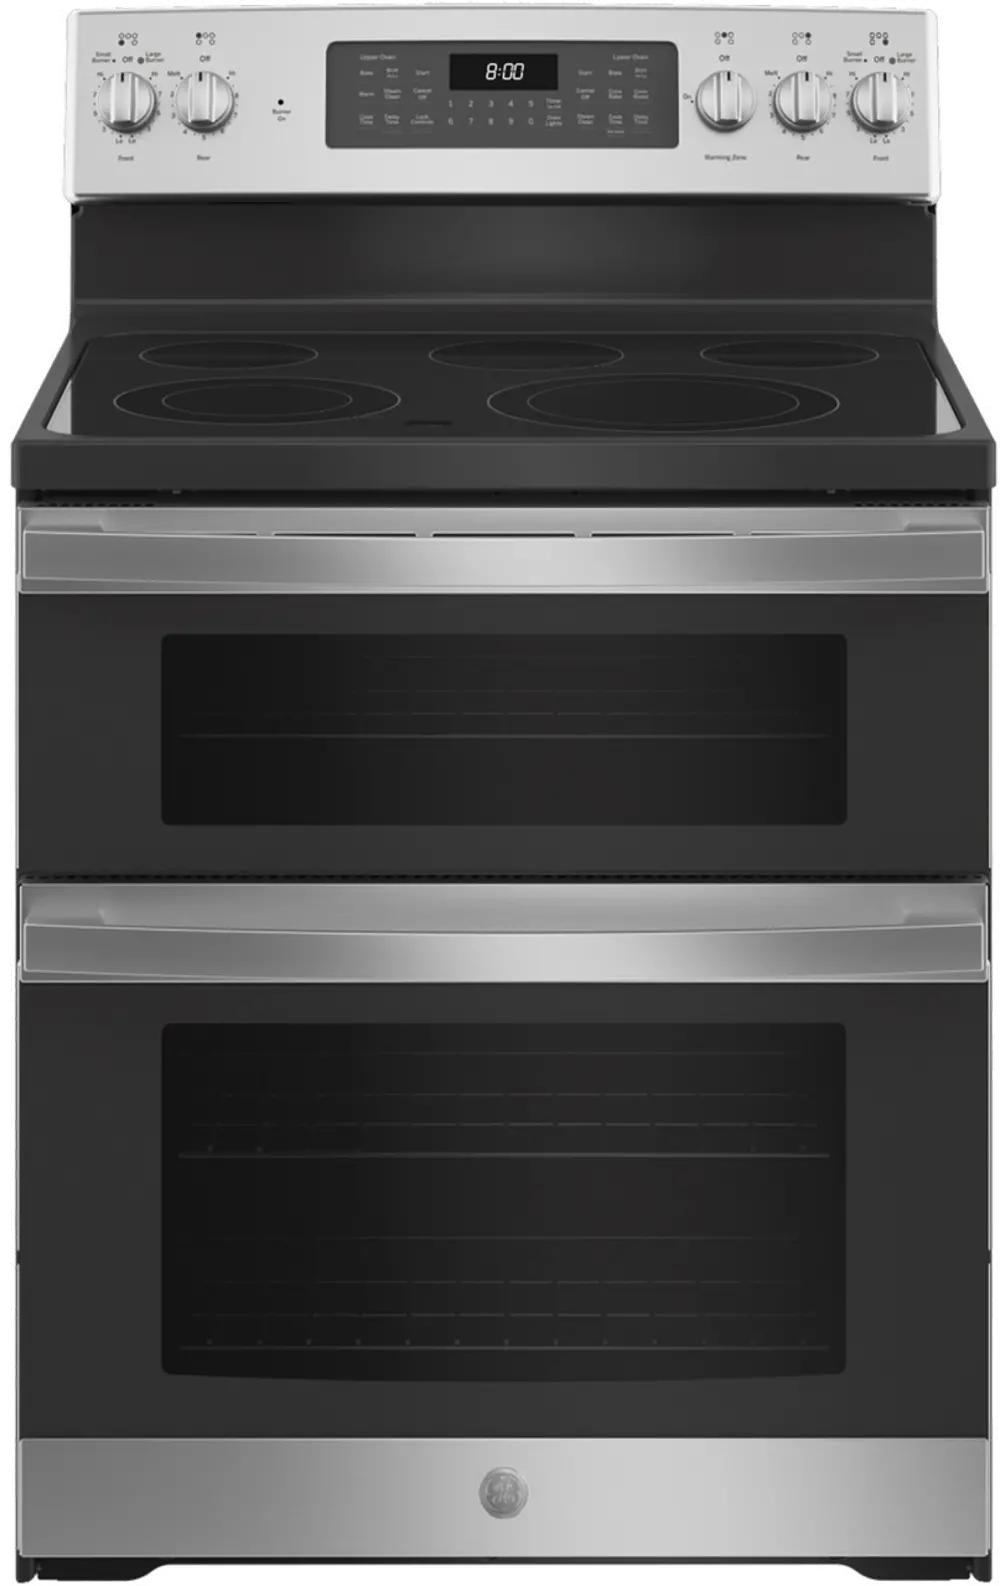 JBS86SPSS-OLD GE Double Oven Electric Range - 6.6 cu. ft., Stainless Steel-1